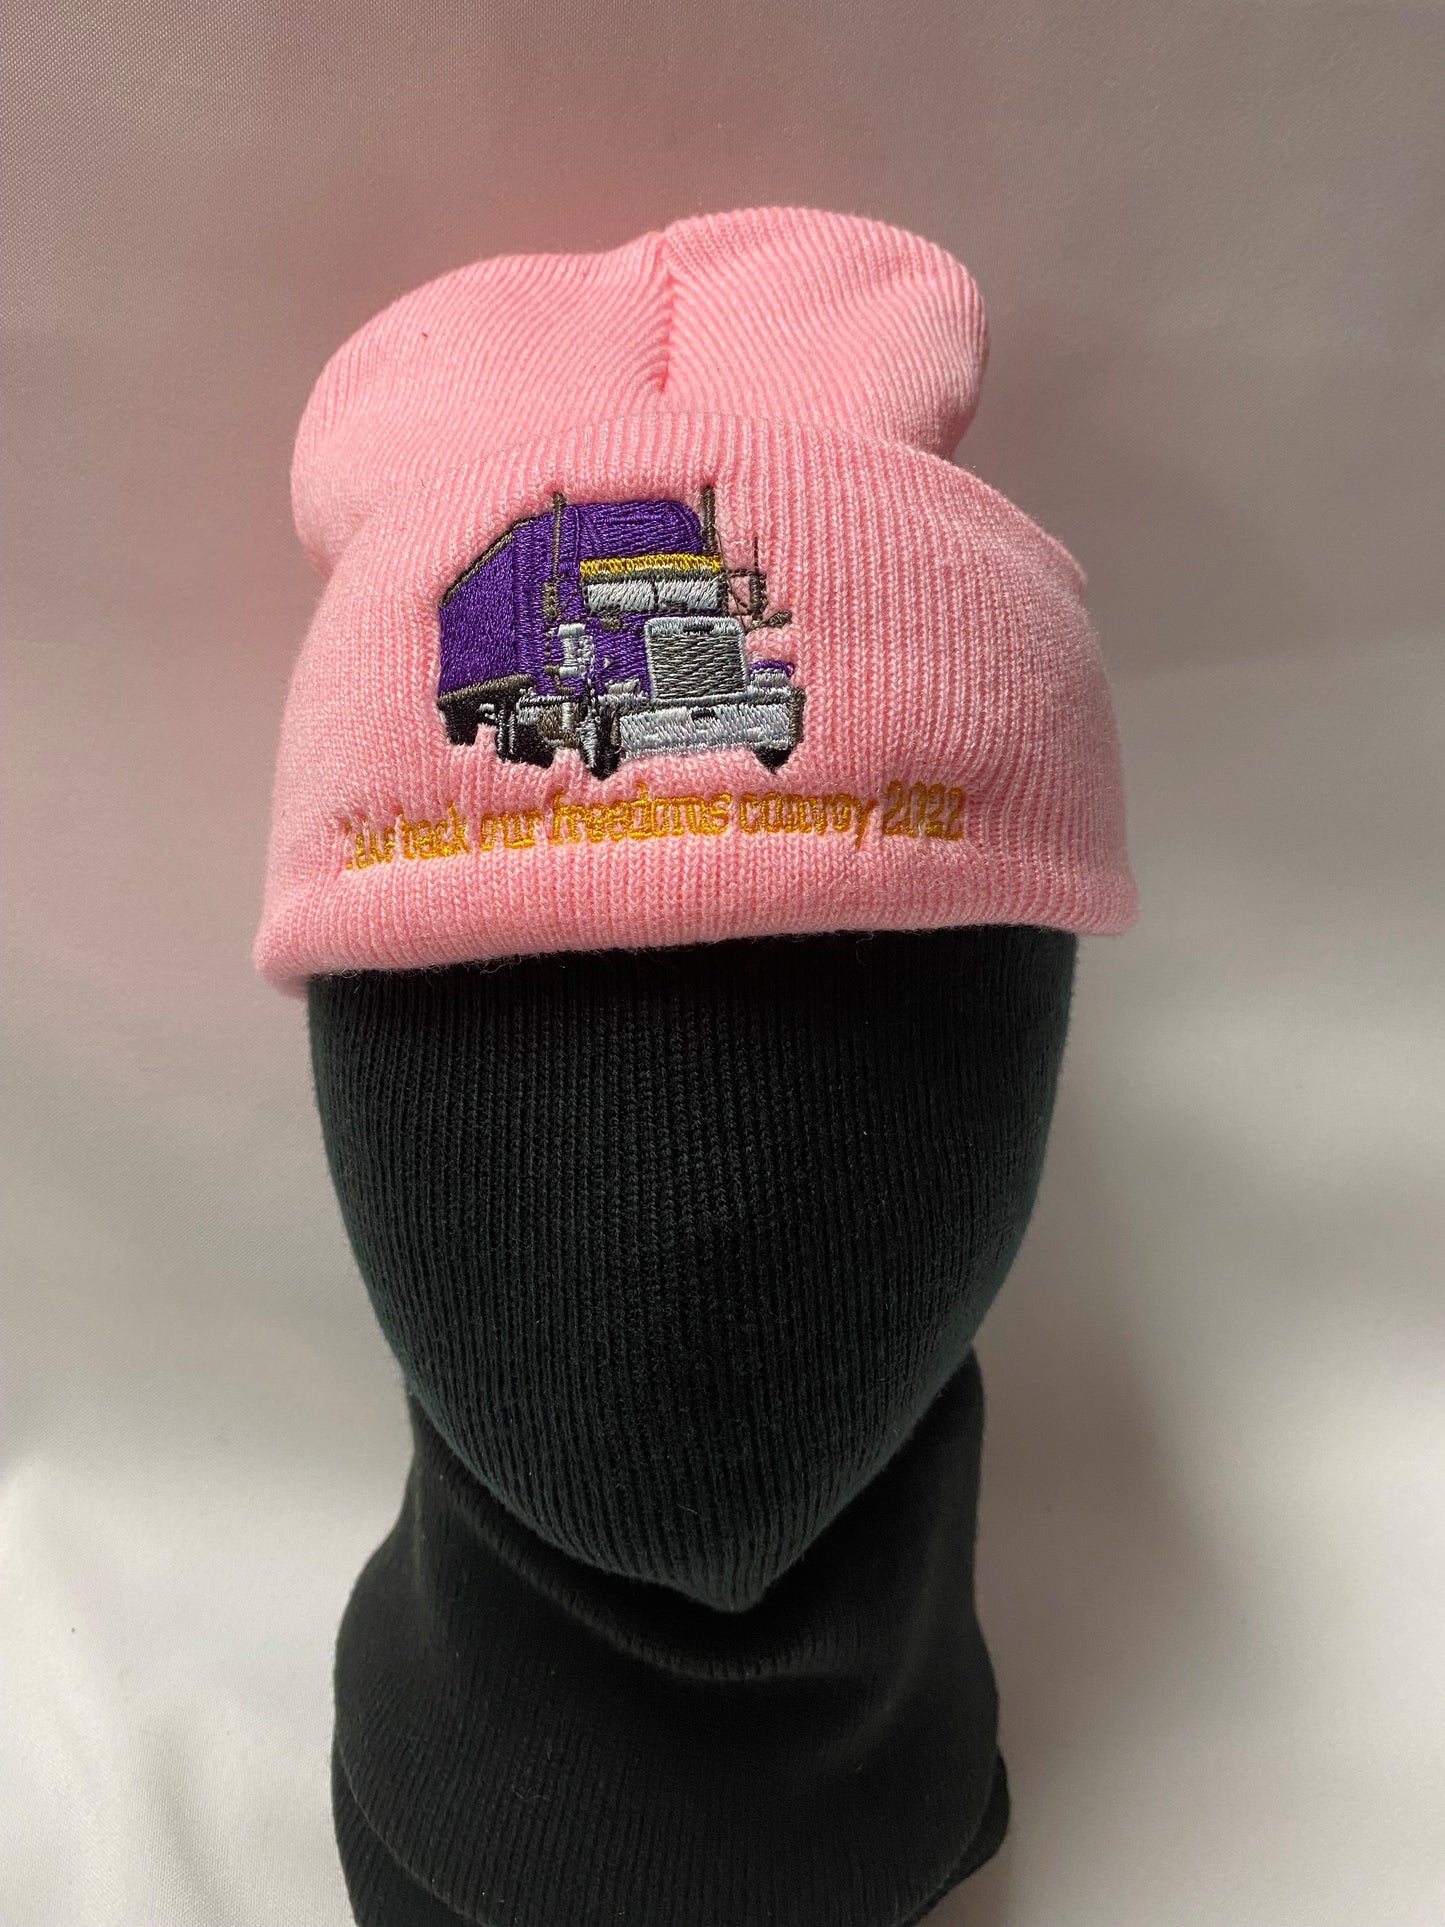 TRUCKER TOQUE pink: "Take back our freedoms convoy 2022"